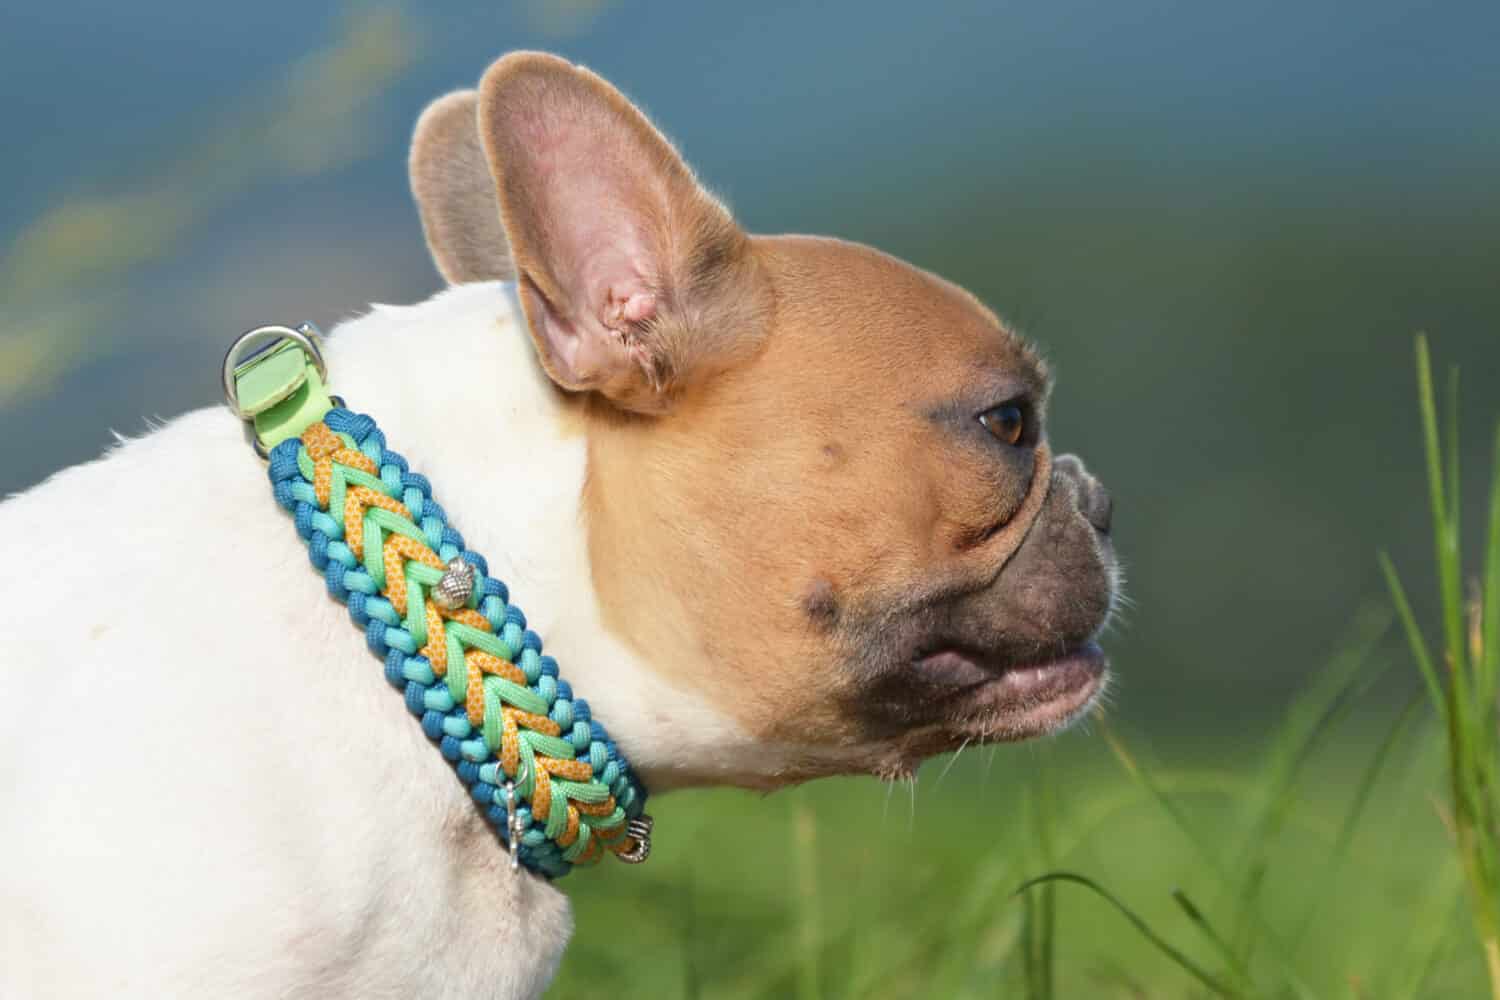 Handmade woven paracord dog collar on red pied French Bulldog 